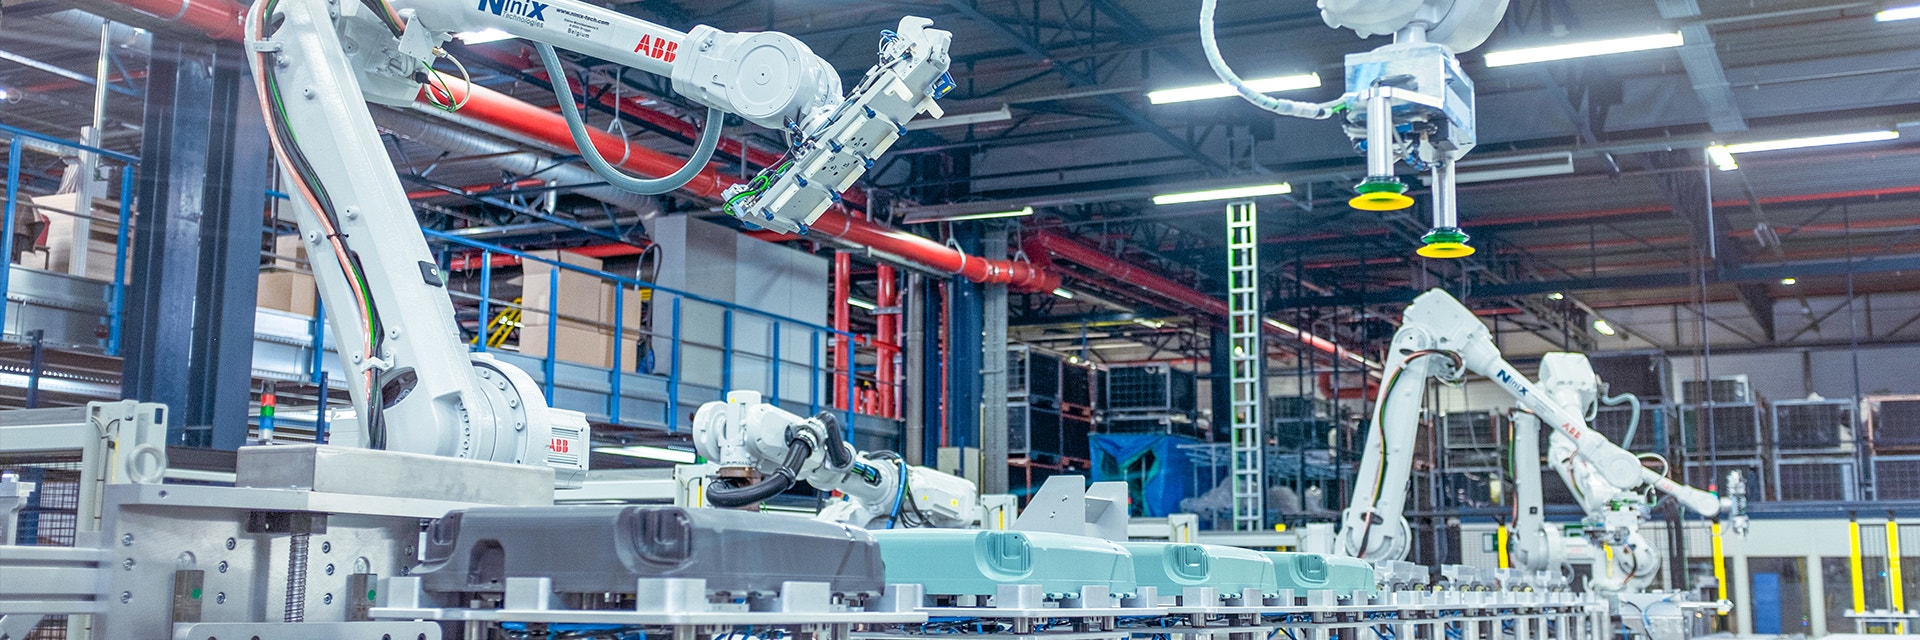 A series of Samsonite suitcases are being assembled on a production line by large ABB robots.